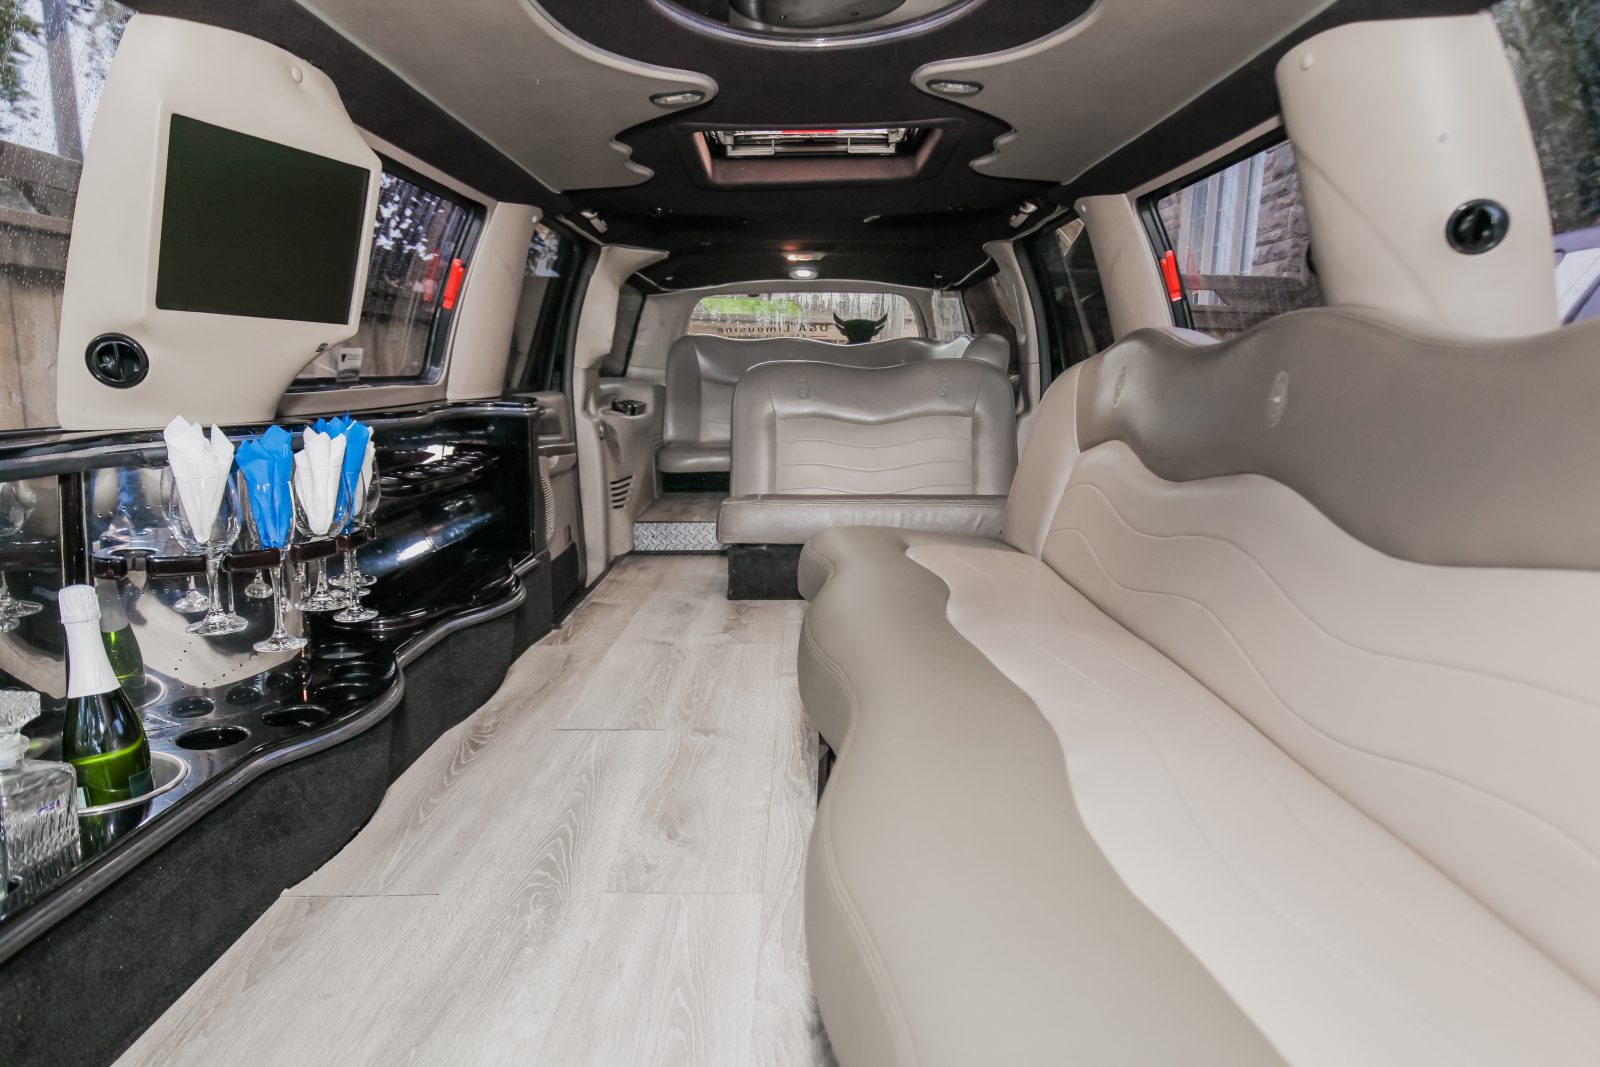 An image showing the inside of the Ford Excursion Stretch Limo